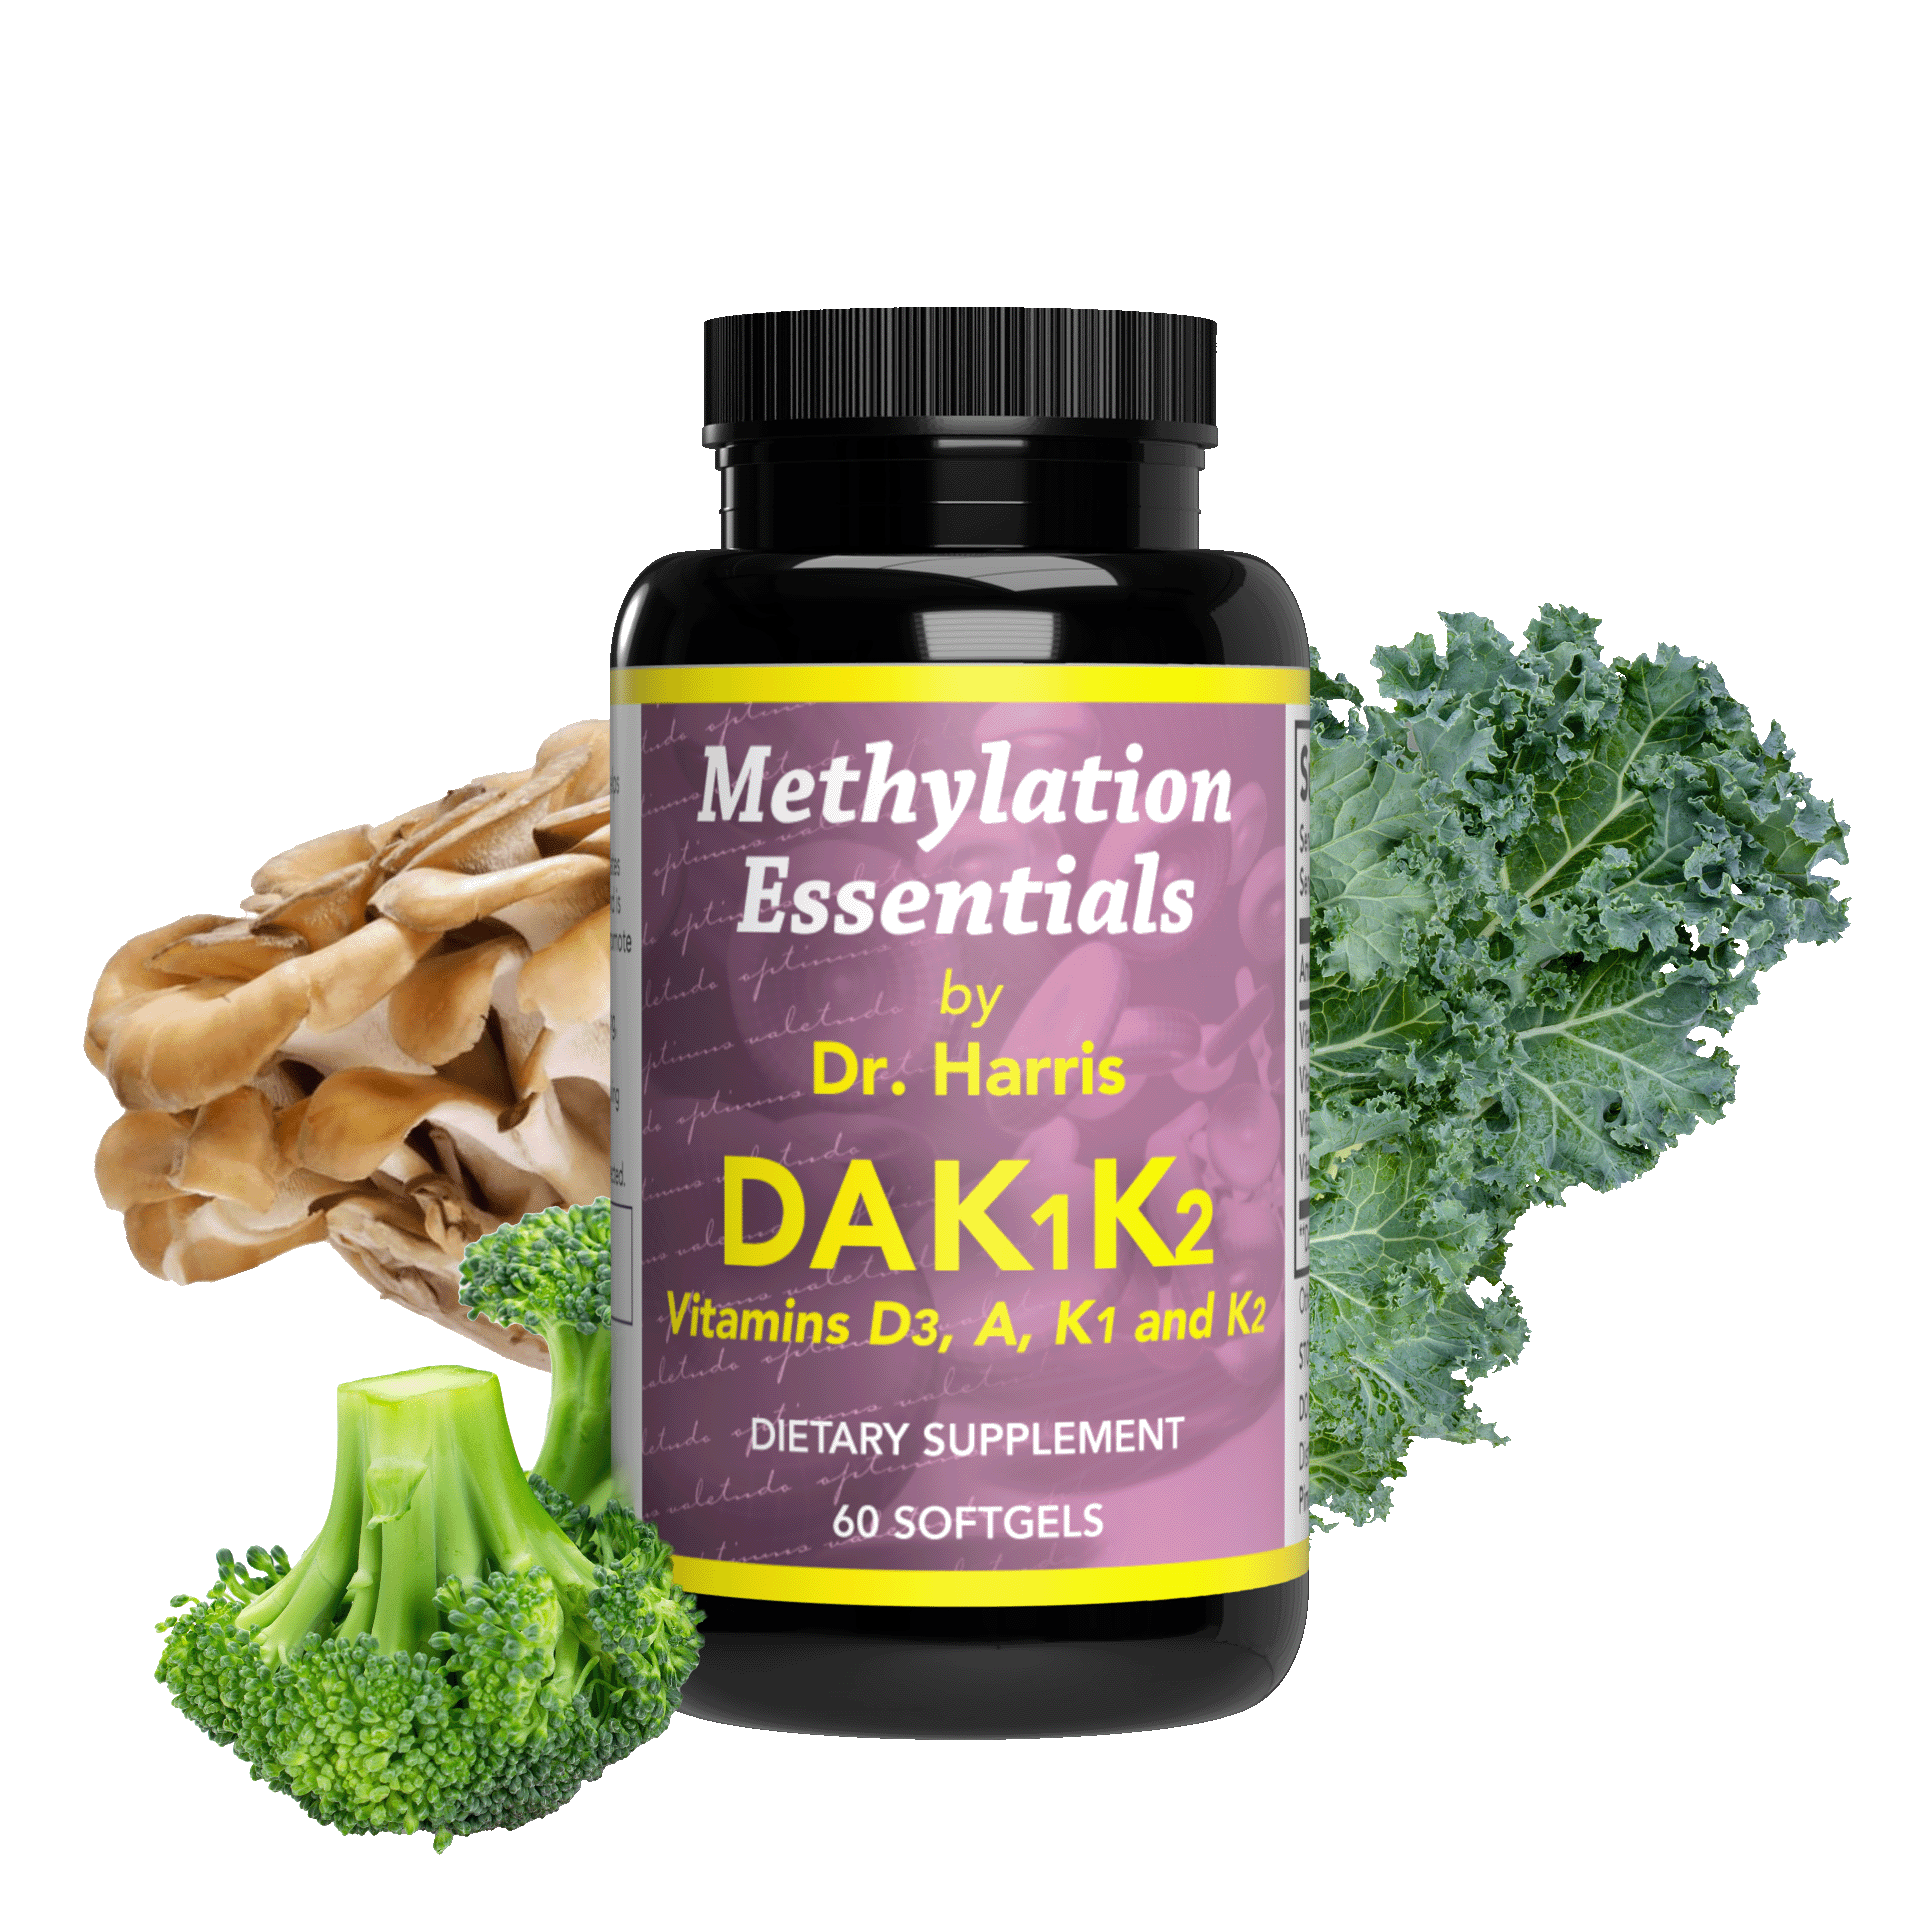 Image of a bottle of Essentials DAK1K2. Around the bottle are broccoli, kale, and mushrooms.